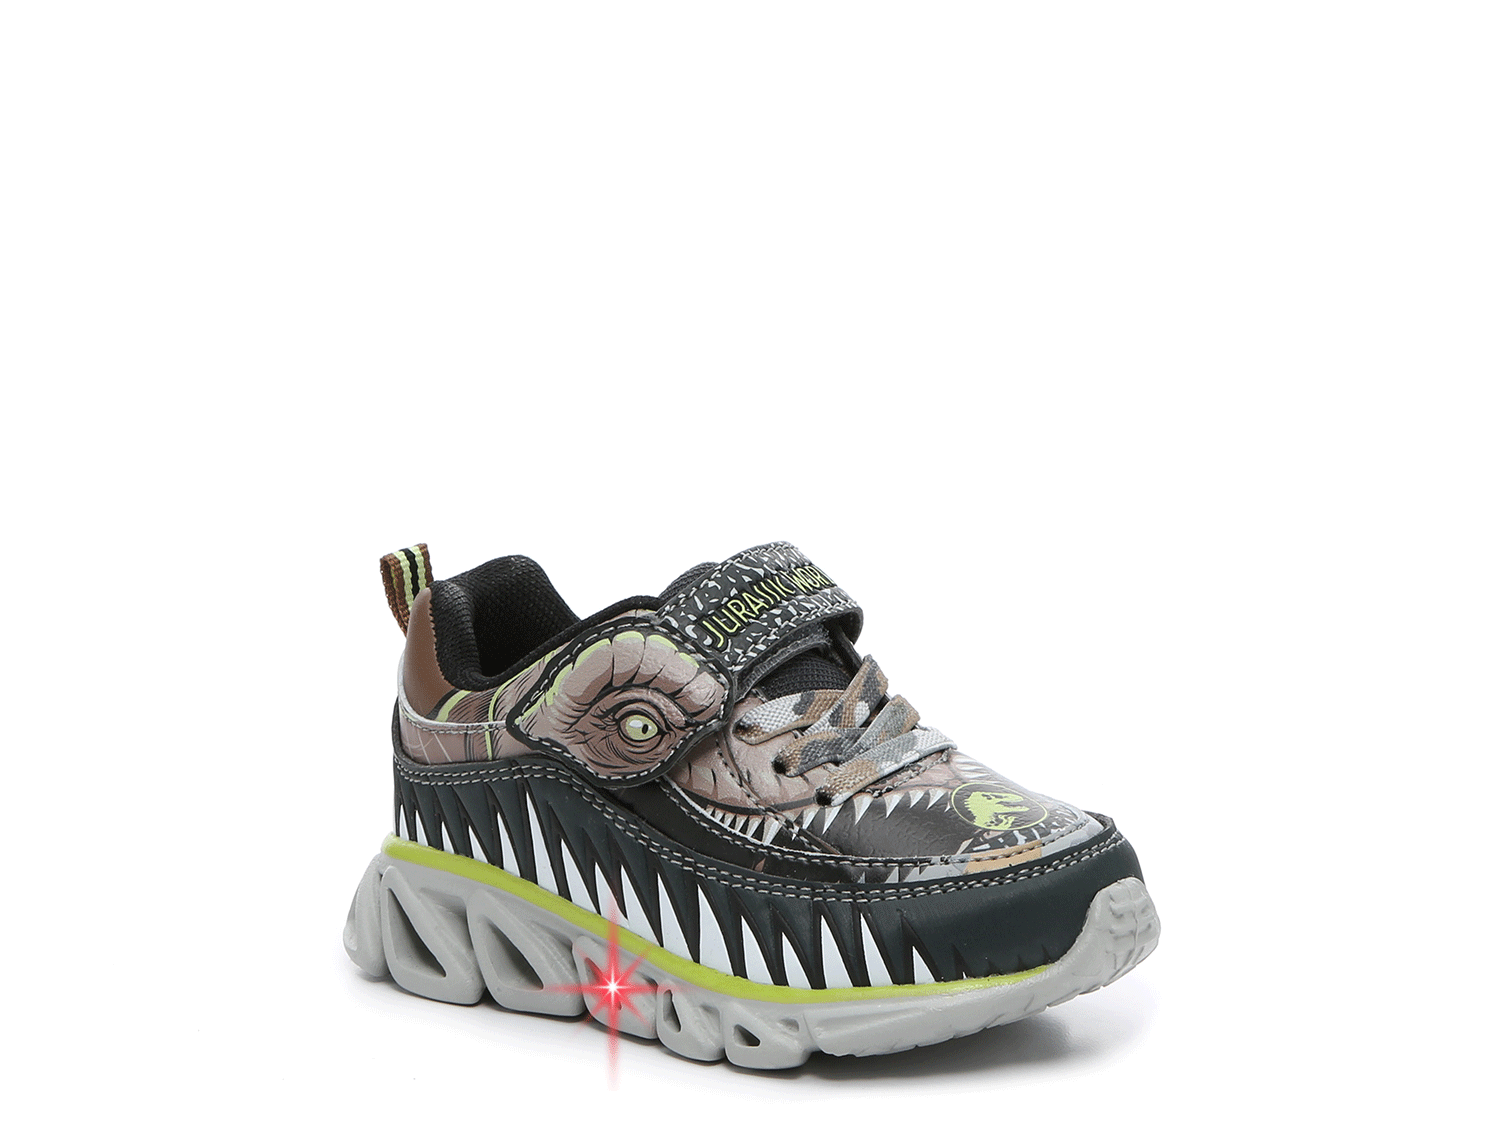 Jurassic World Sneakers Shoes Size 6 7 8 9 10 11 12 Light Up Toddler New Boys 